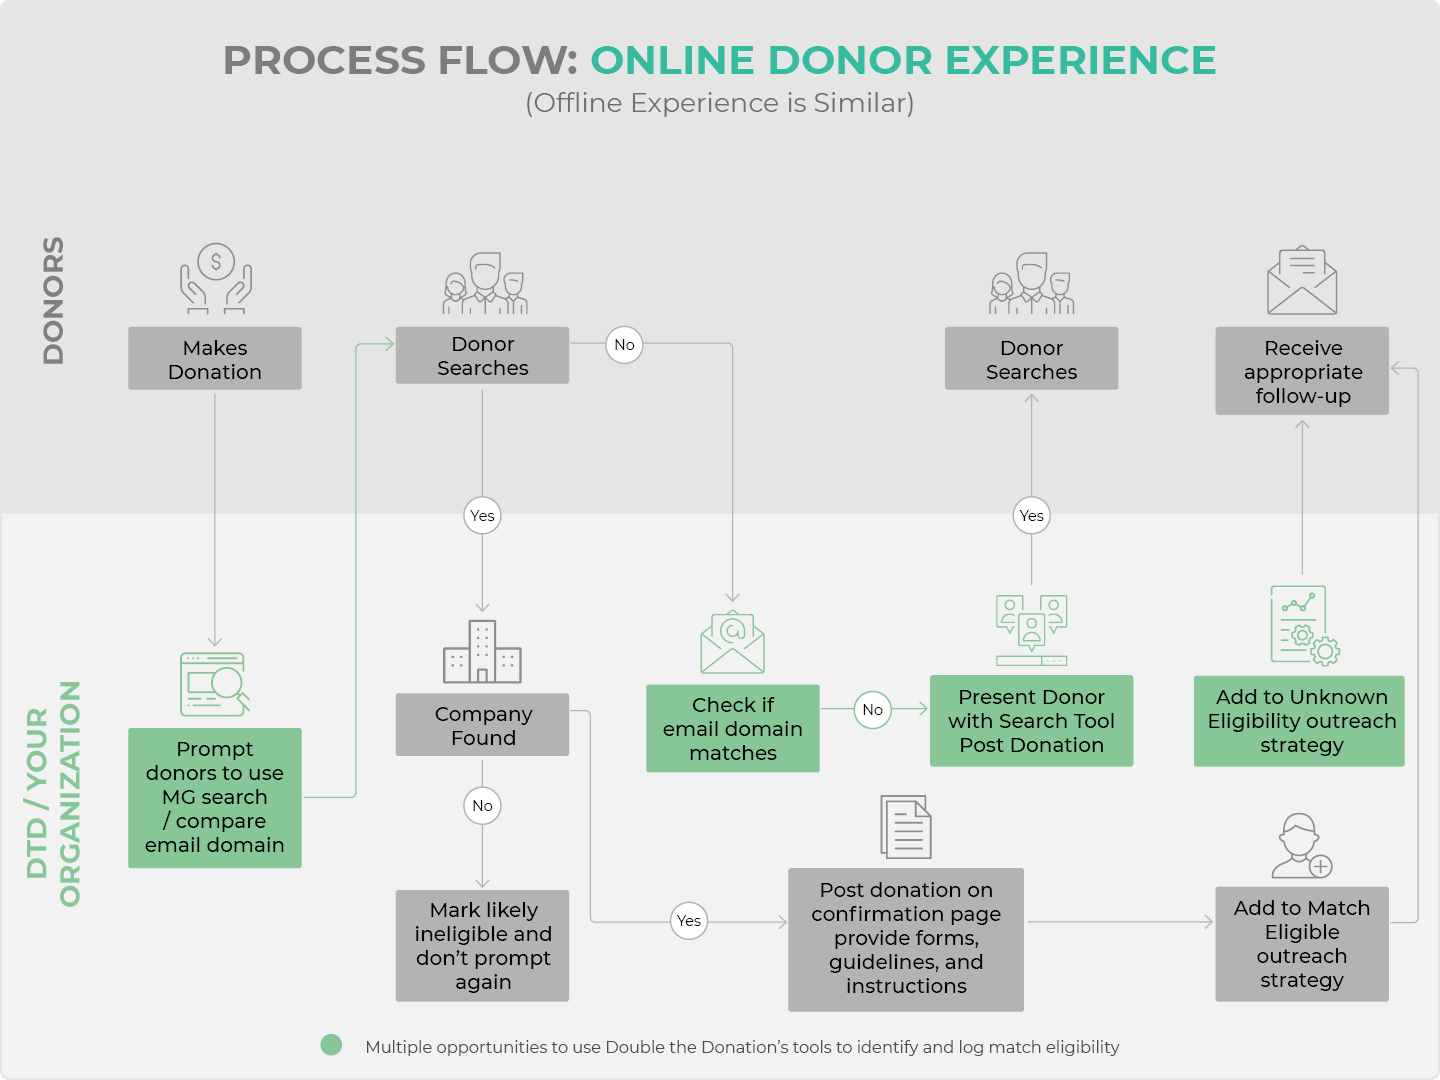 This is the process for improving the online donor journey.